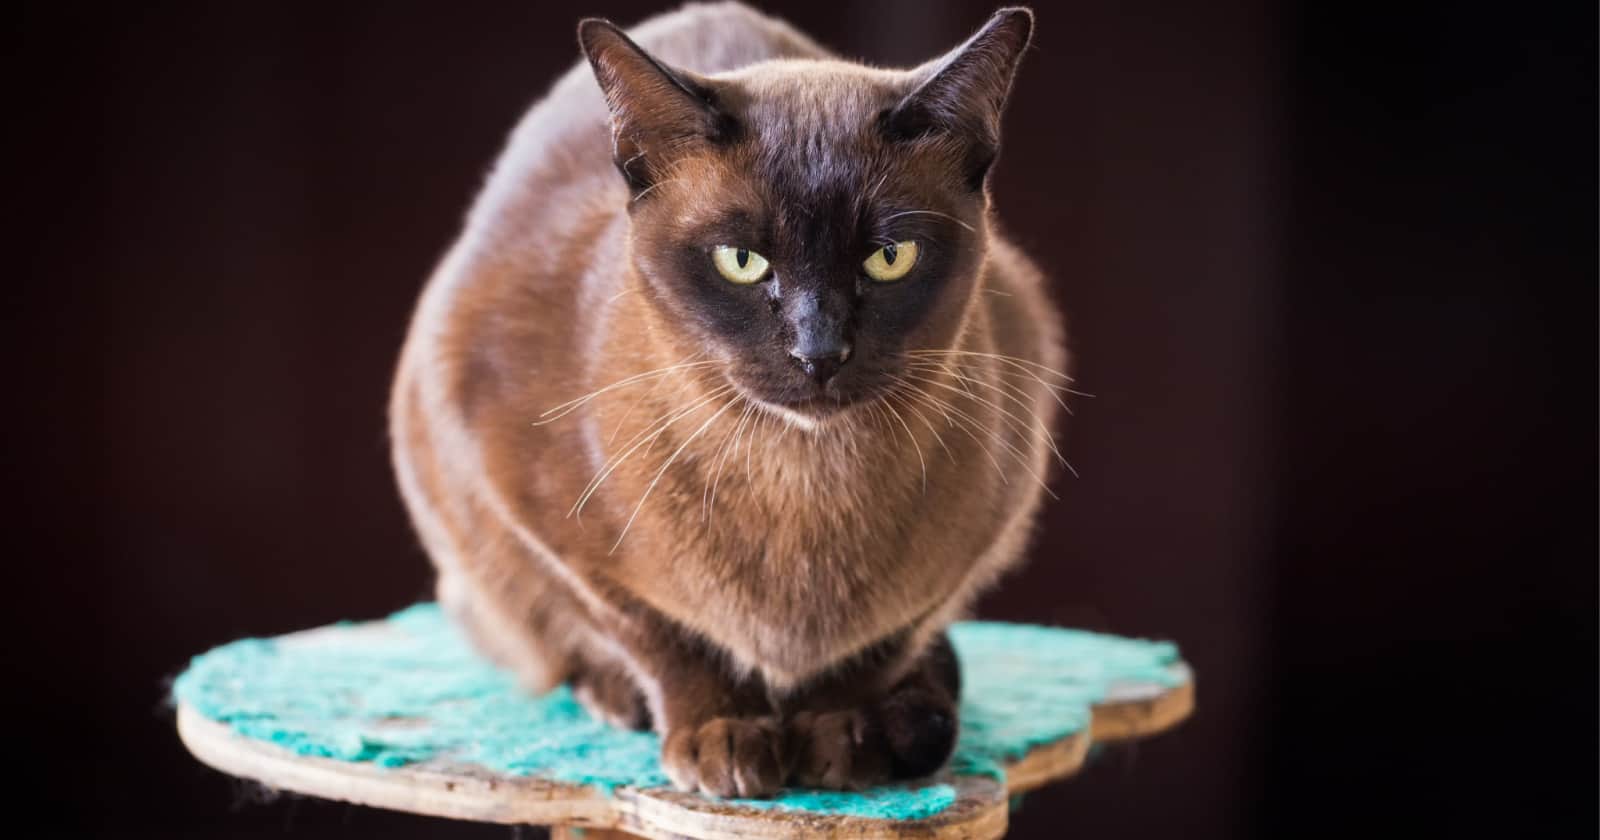 What are the best mouser cat breeds? These 7 kitties are excellent hunters. Be warned, though, they love bringing you gifts to prove their prowess!